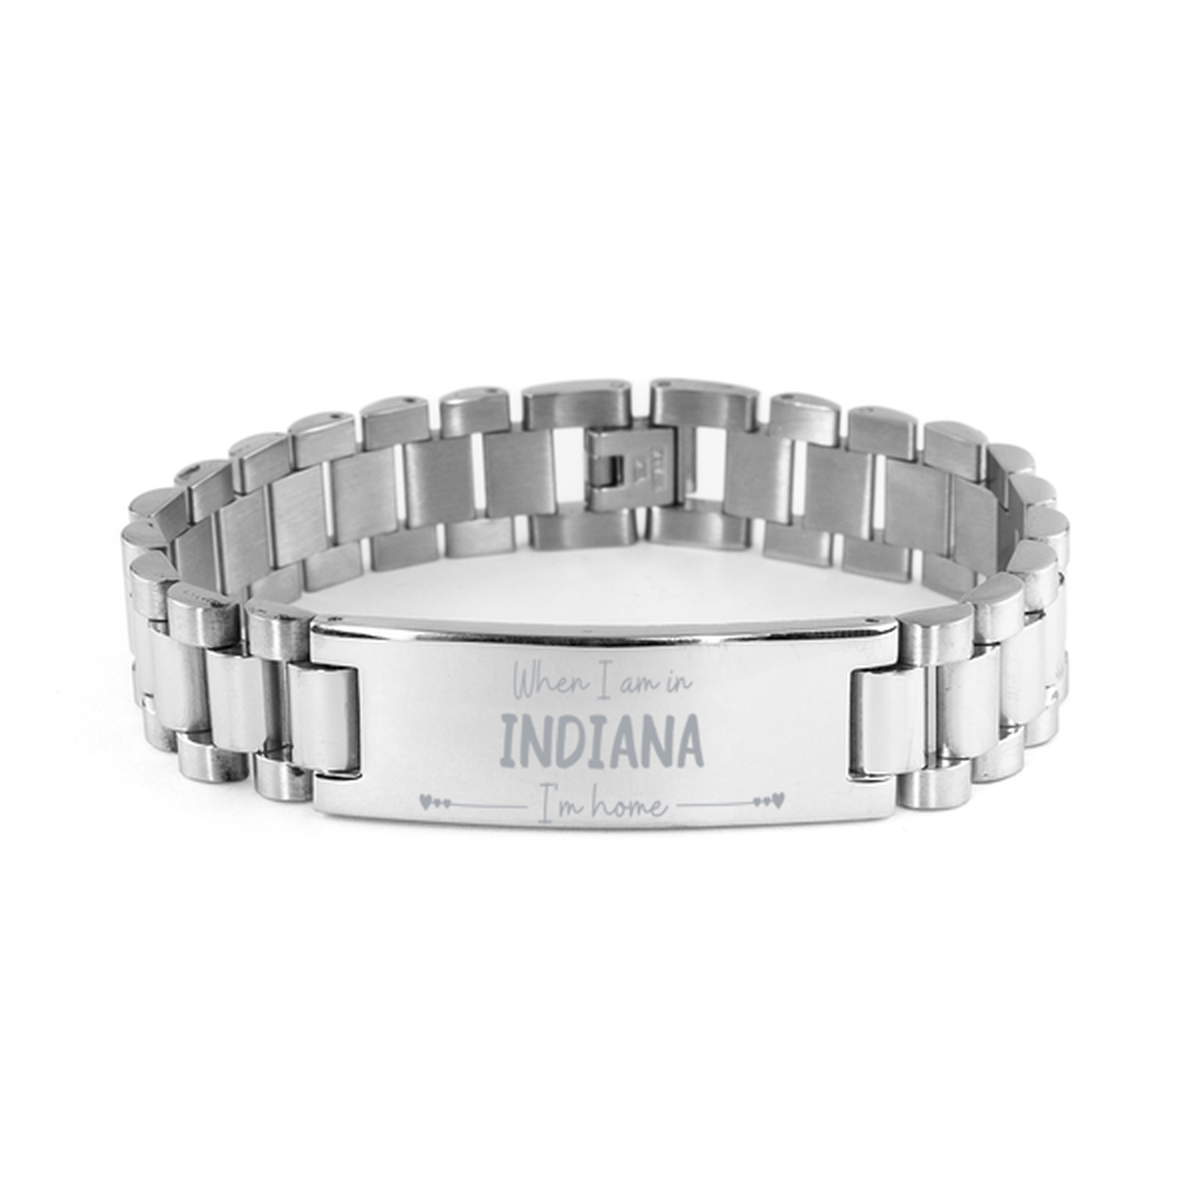 When I am in Indiana I'm home Ladder Stainless Steel Bracelet, Cheap Gifts For Indiana, State Indiana Birthday Gifts for Friends Coworker